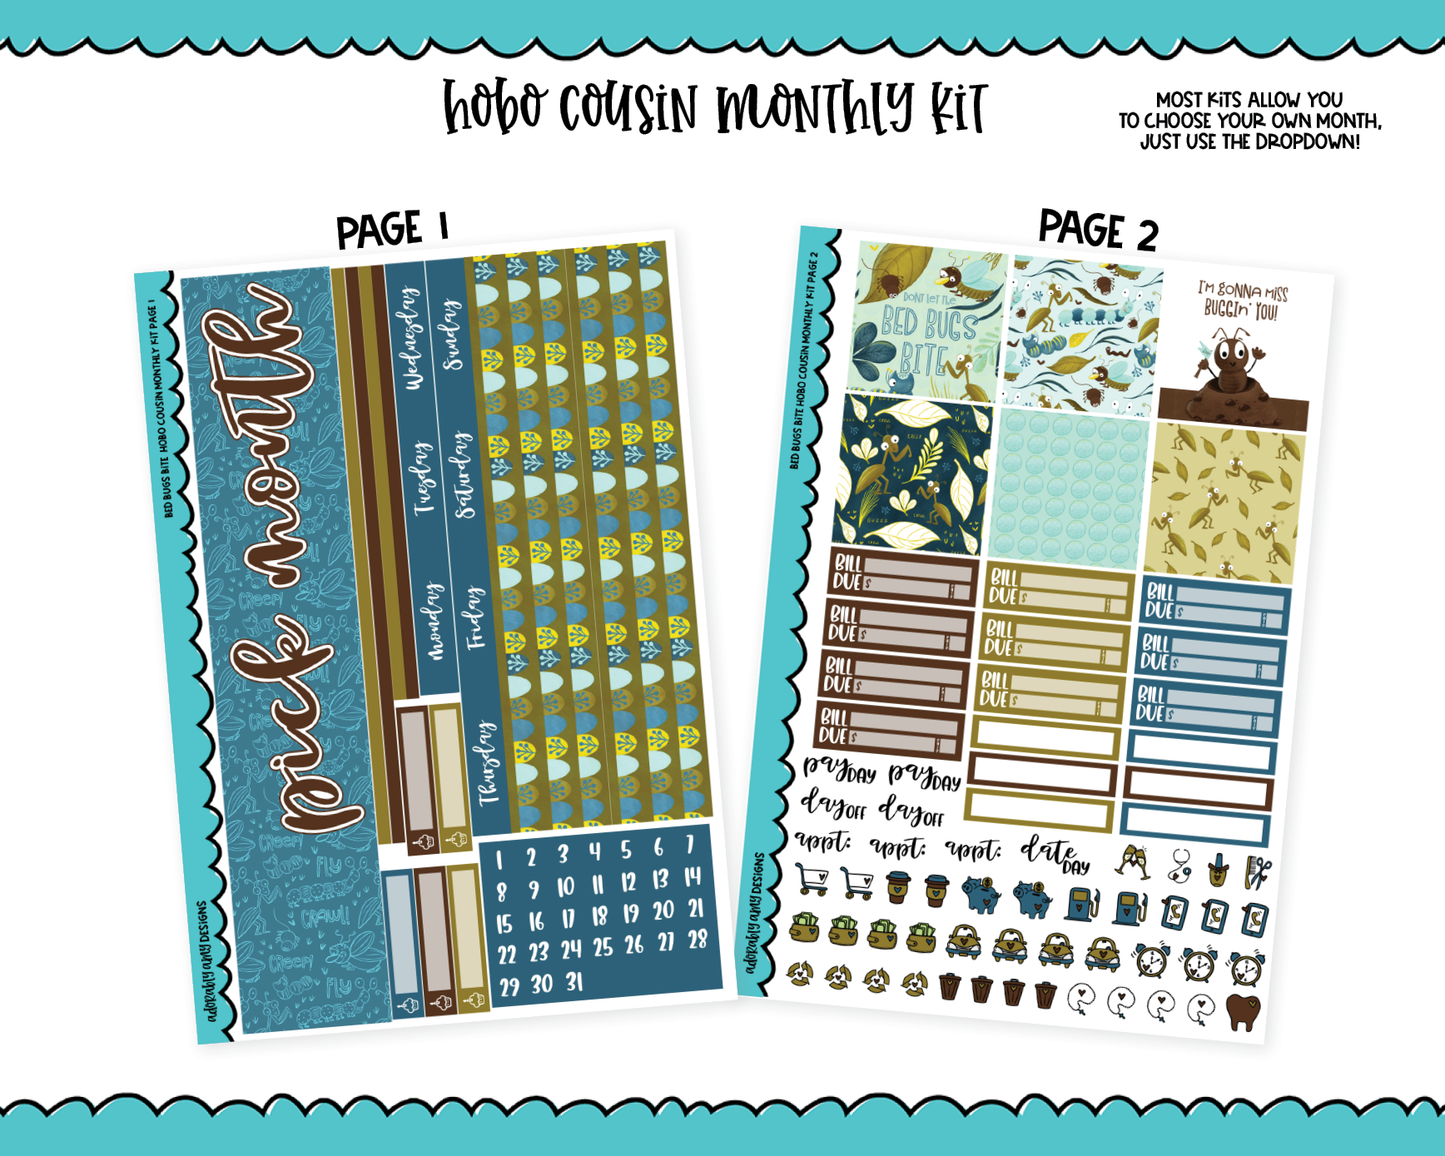 Hobonichi Cousin Monthly Pick Your Month Bed Bugs Themed Planner Sticker Kit for Hobo Cousin or Similar Planners